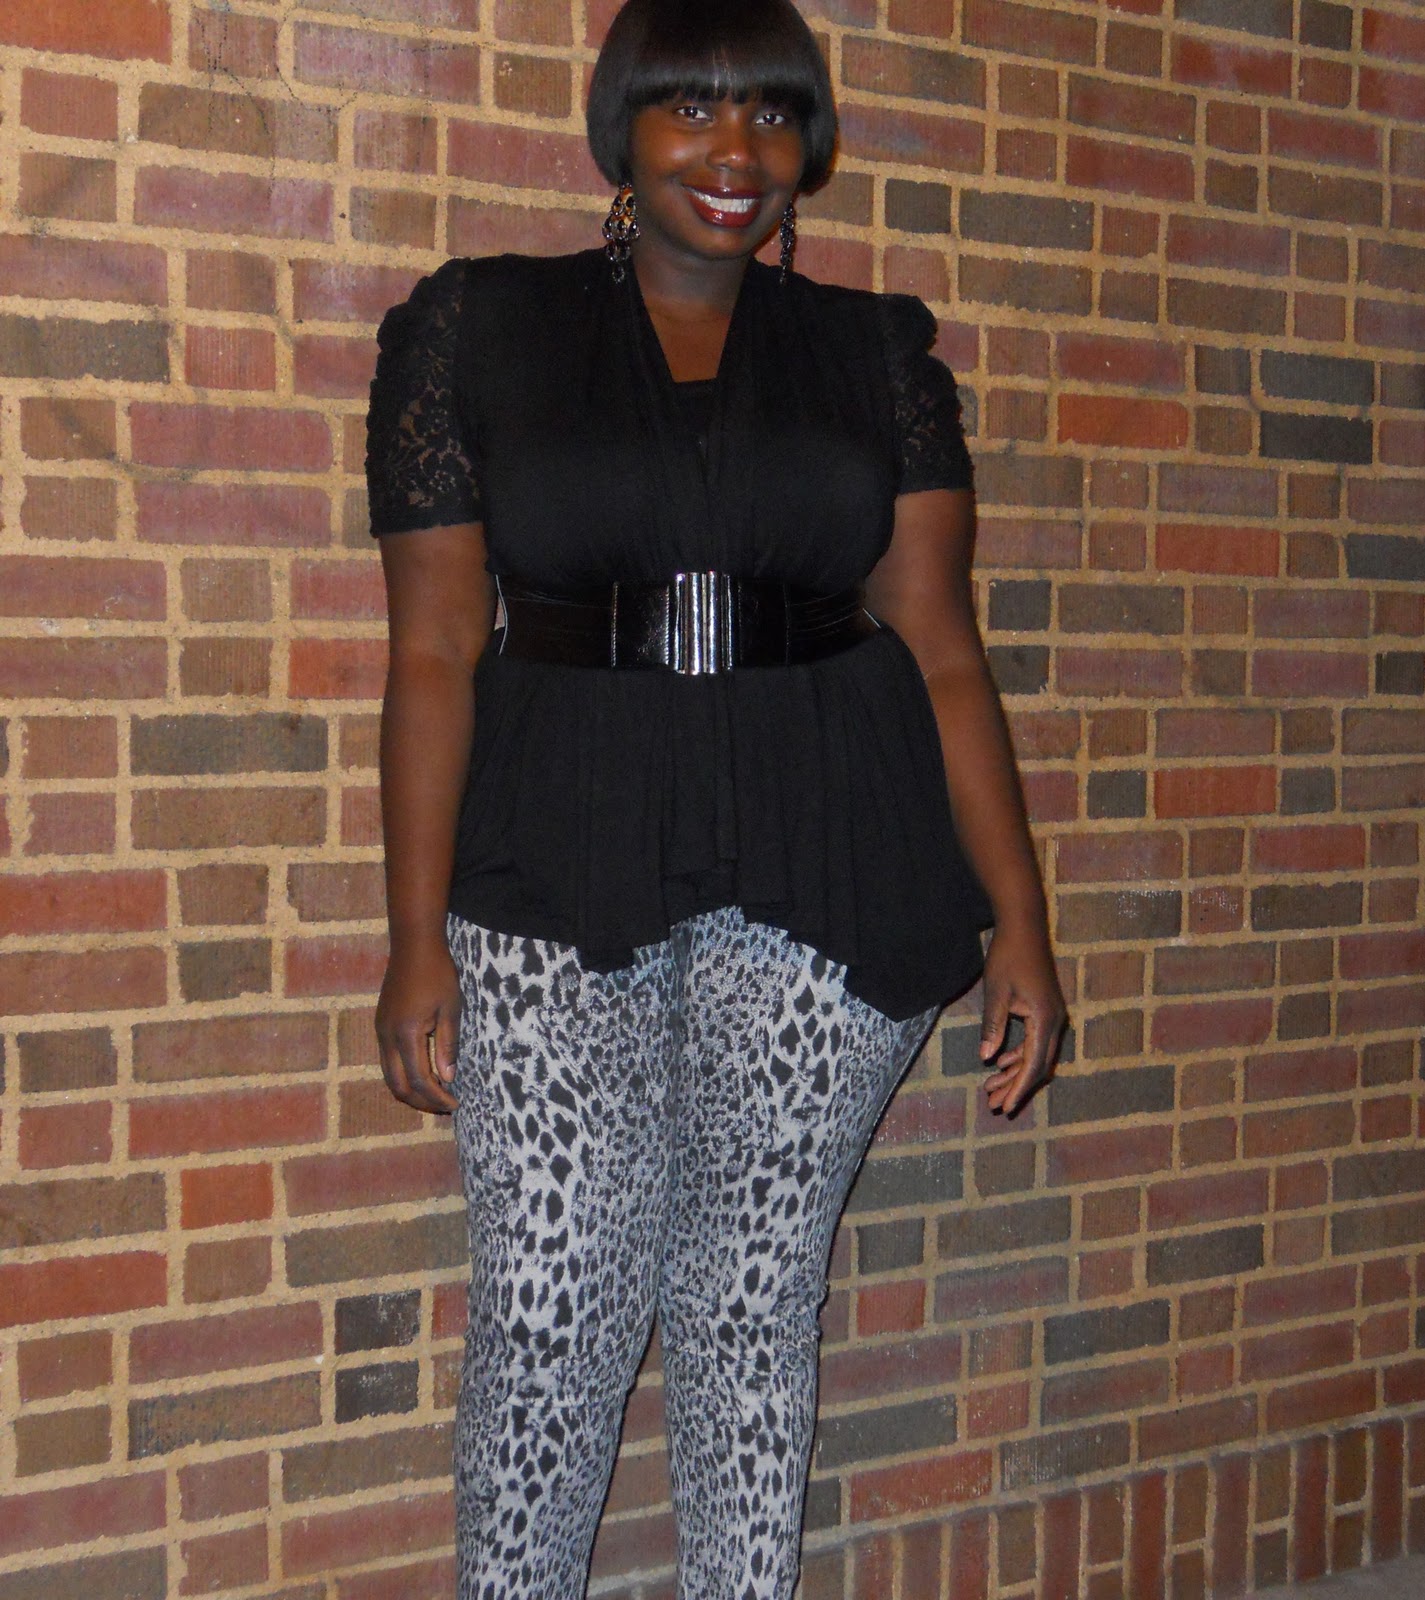 AN OLD FAVORITE: WHO SAYS A CURVY GIRL CAN'T WEAR LEOPARD PRINT